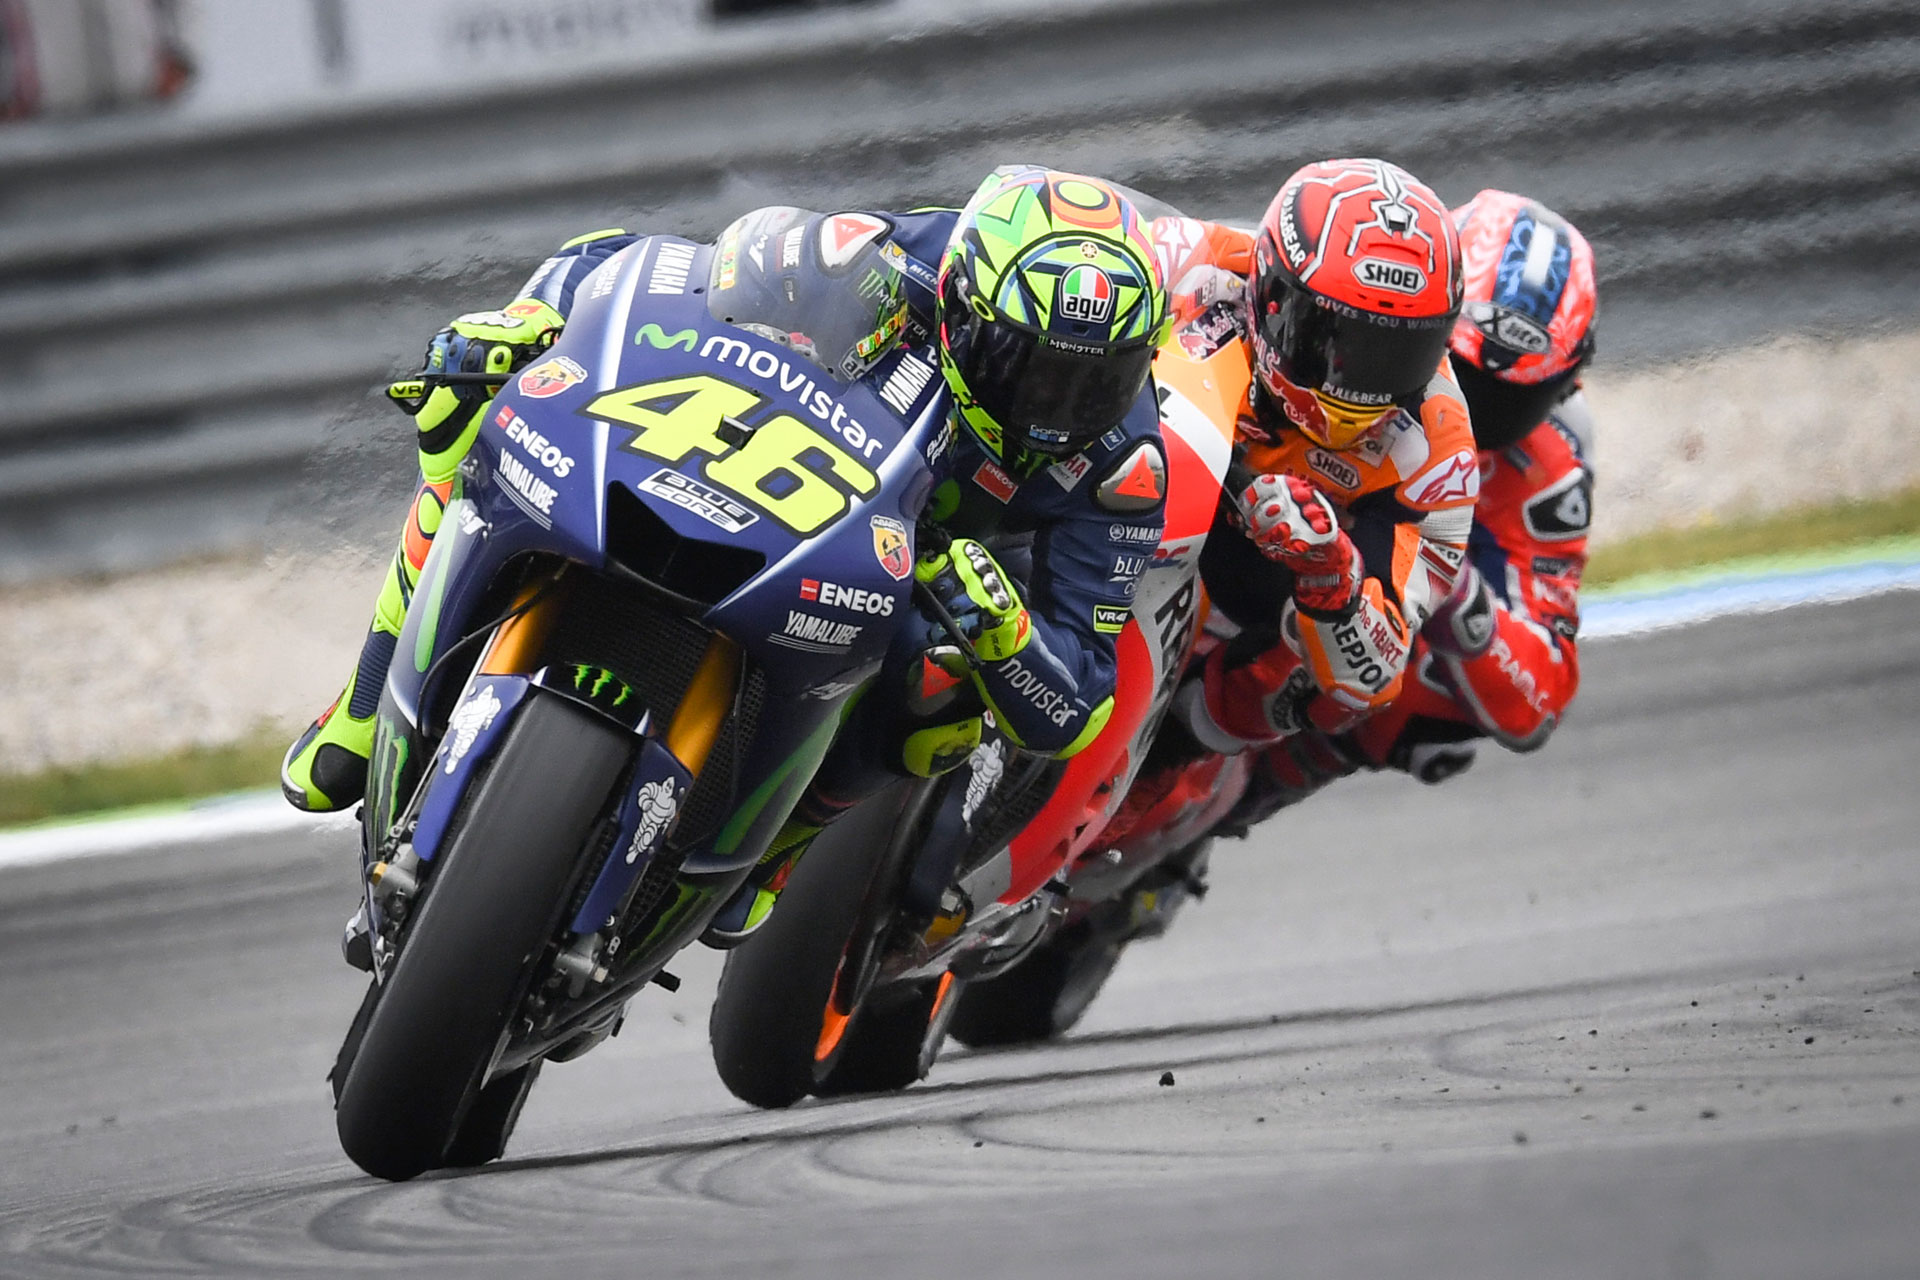 kontakt reform endnu engang Valentino Rossi takes the win in Assen - Petrucci 2nd - Bike Review